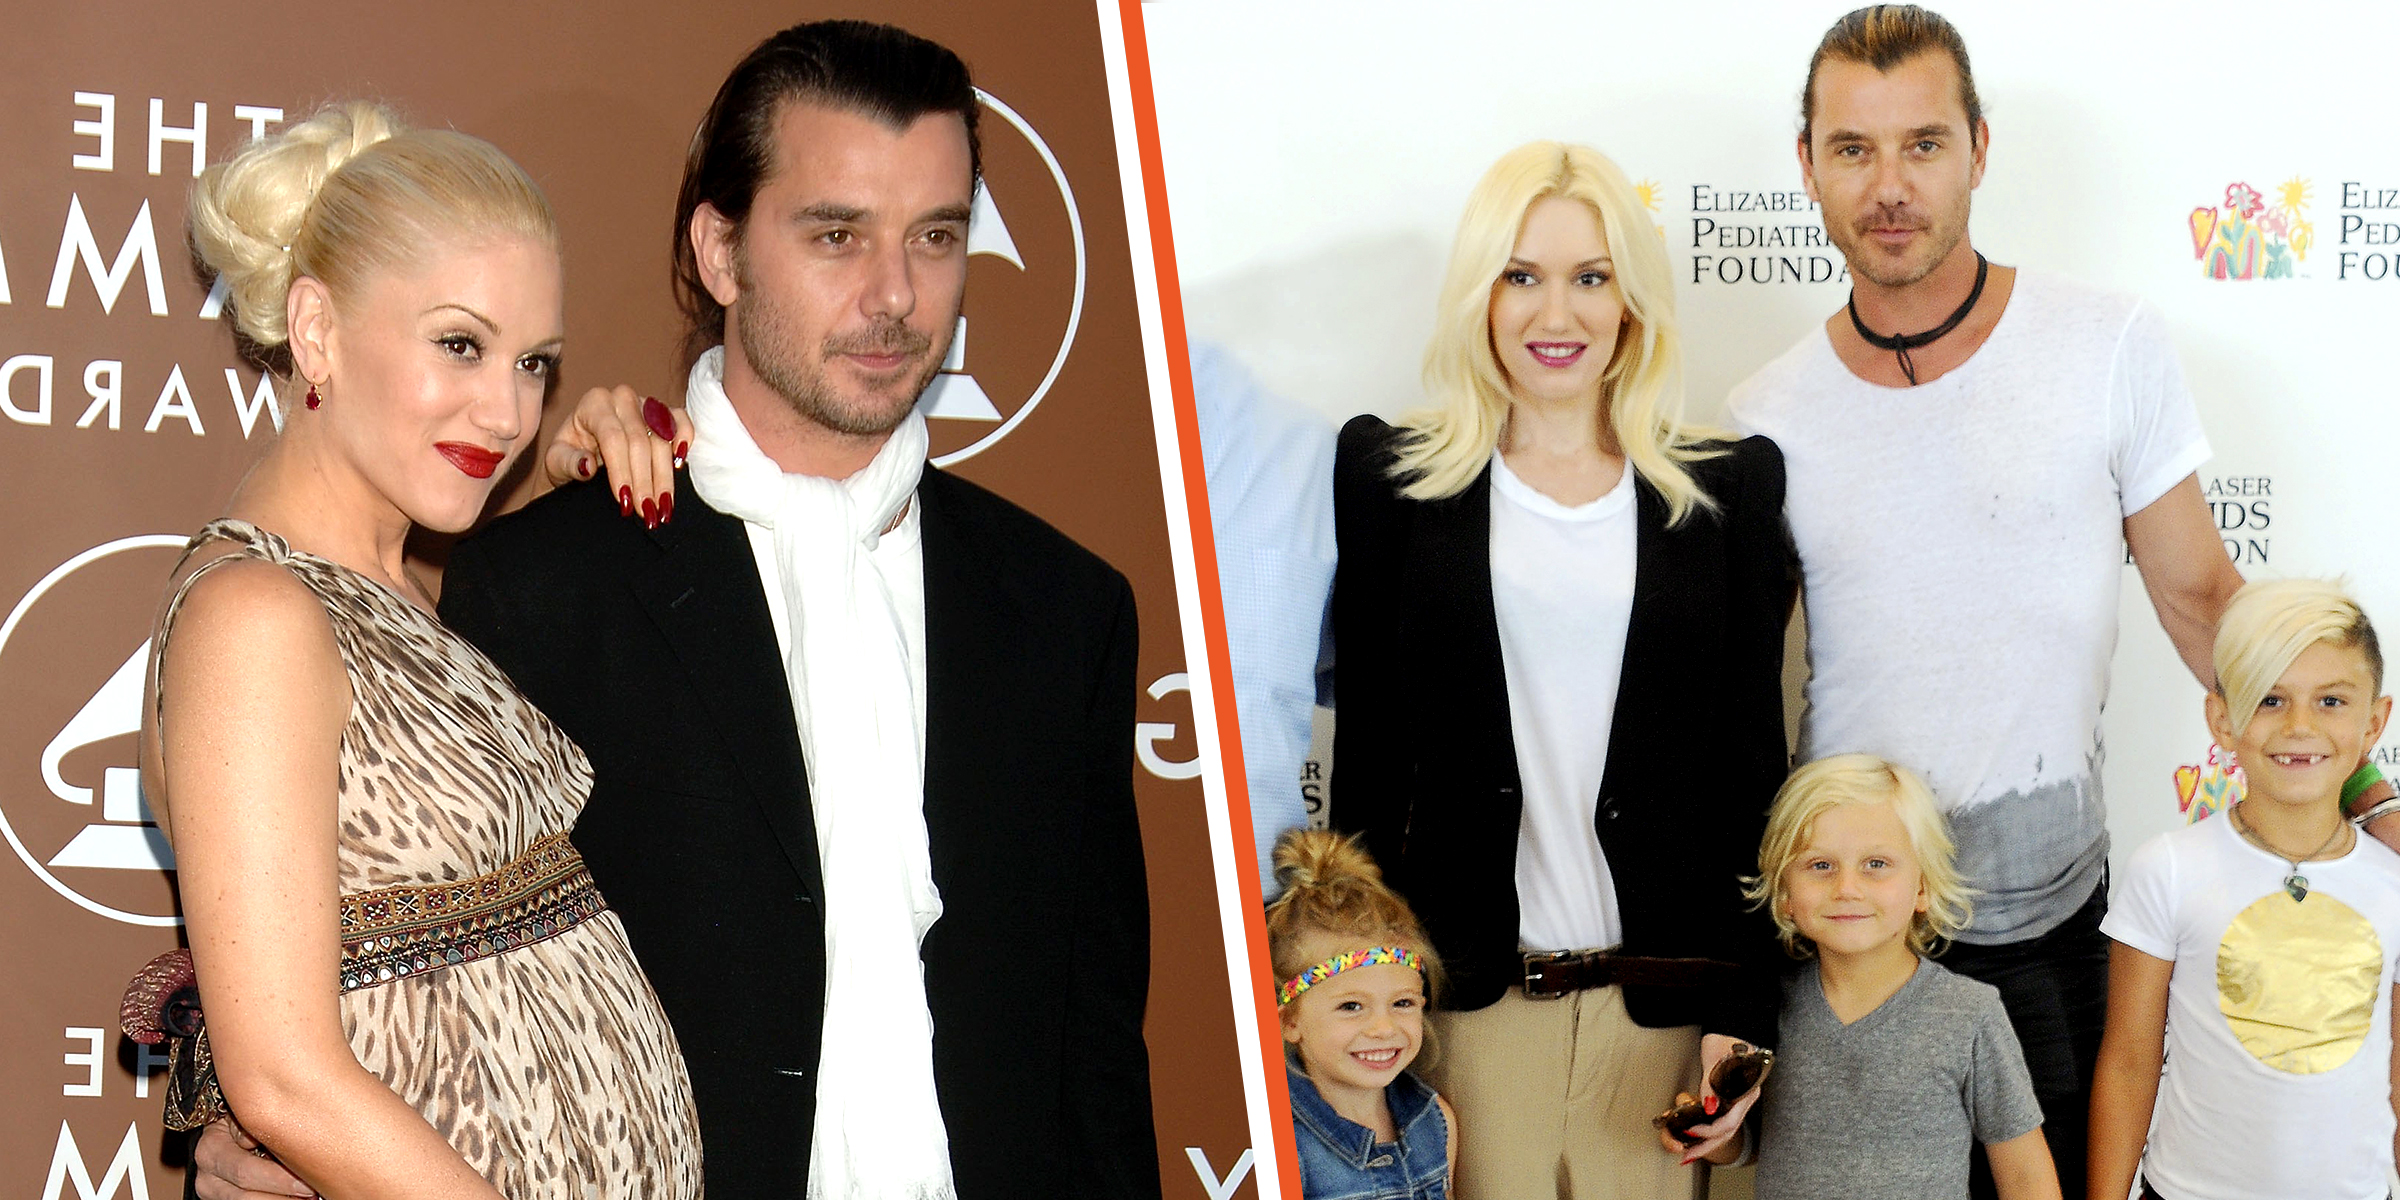 Gwen Stefani and Gavin Rossdale | Gwen Stefani and Gavin Rossdale with their children, Kingston, Zuma, and Apollo | Source: Getty Images